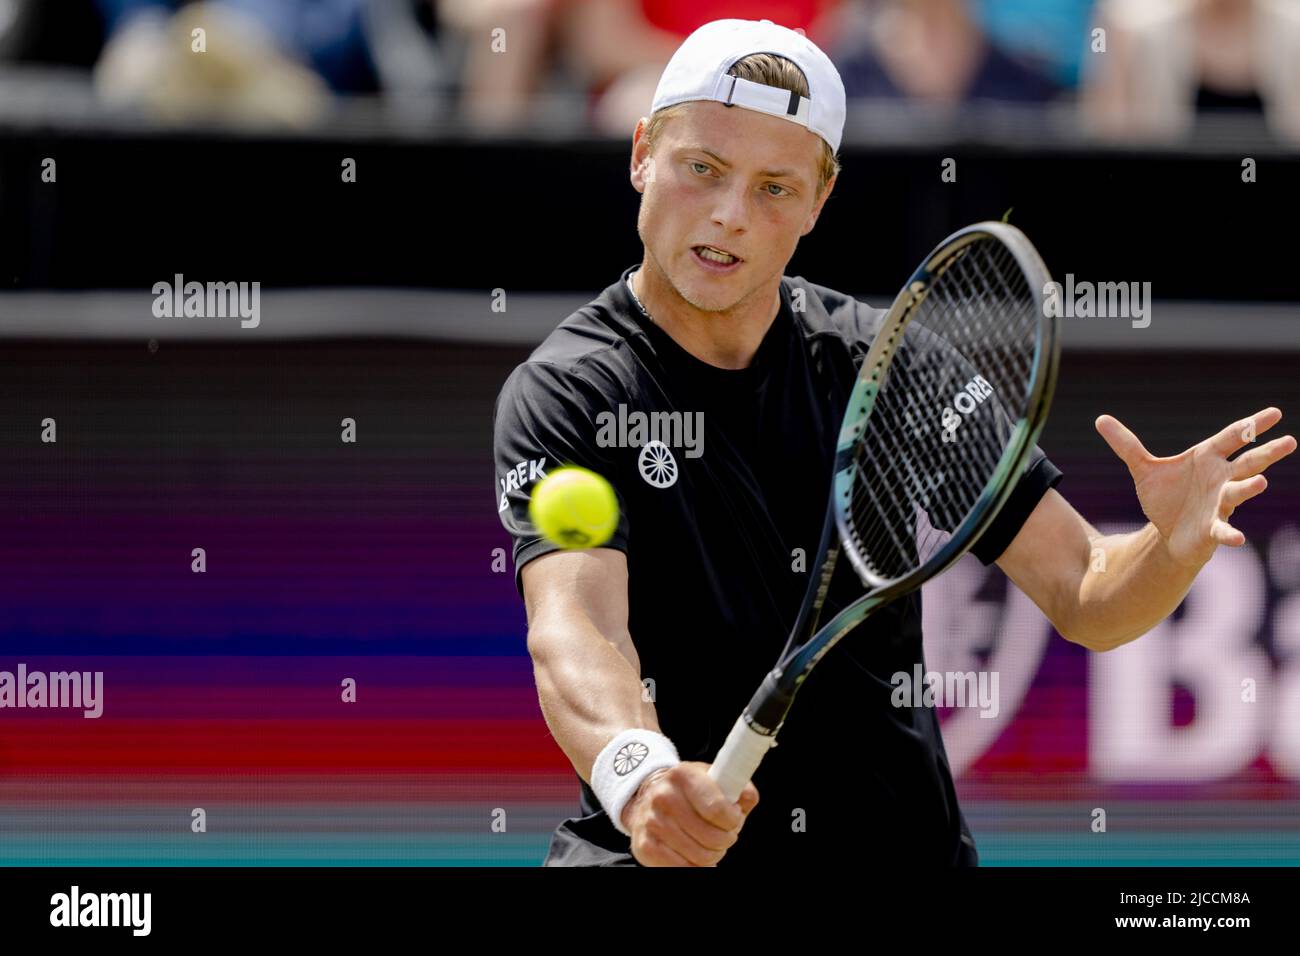 ROSMALEN - Tennis player Tim Van Rijthoven in action against Daniil  Medvedev (not in photo, Russia) during the final of the international tennis  tournament Libema Open. The combined Dutch tennis tournament for